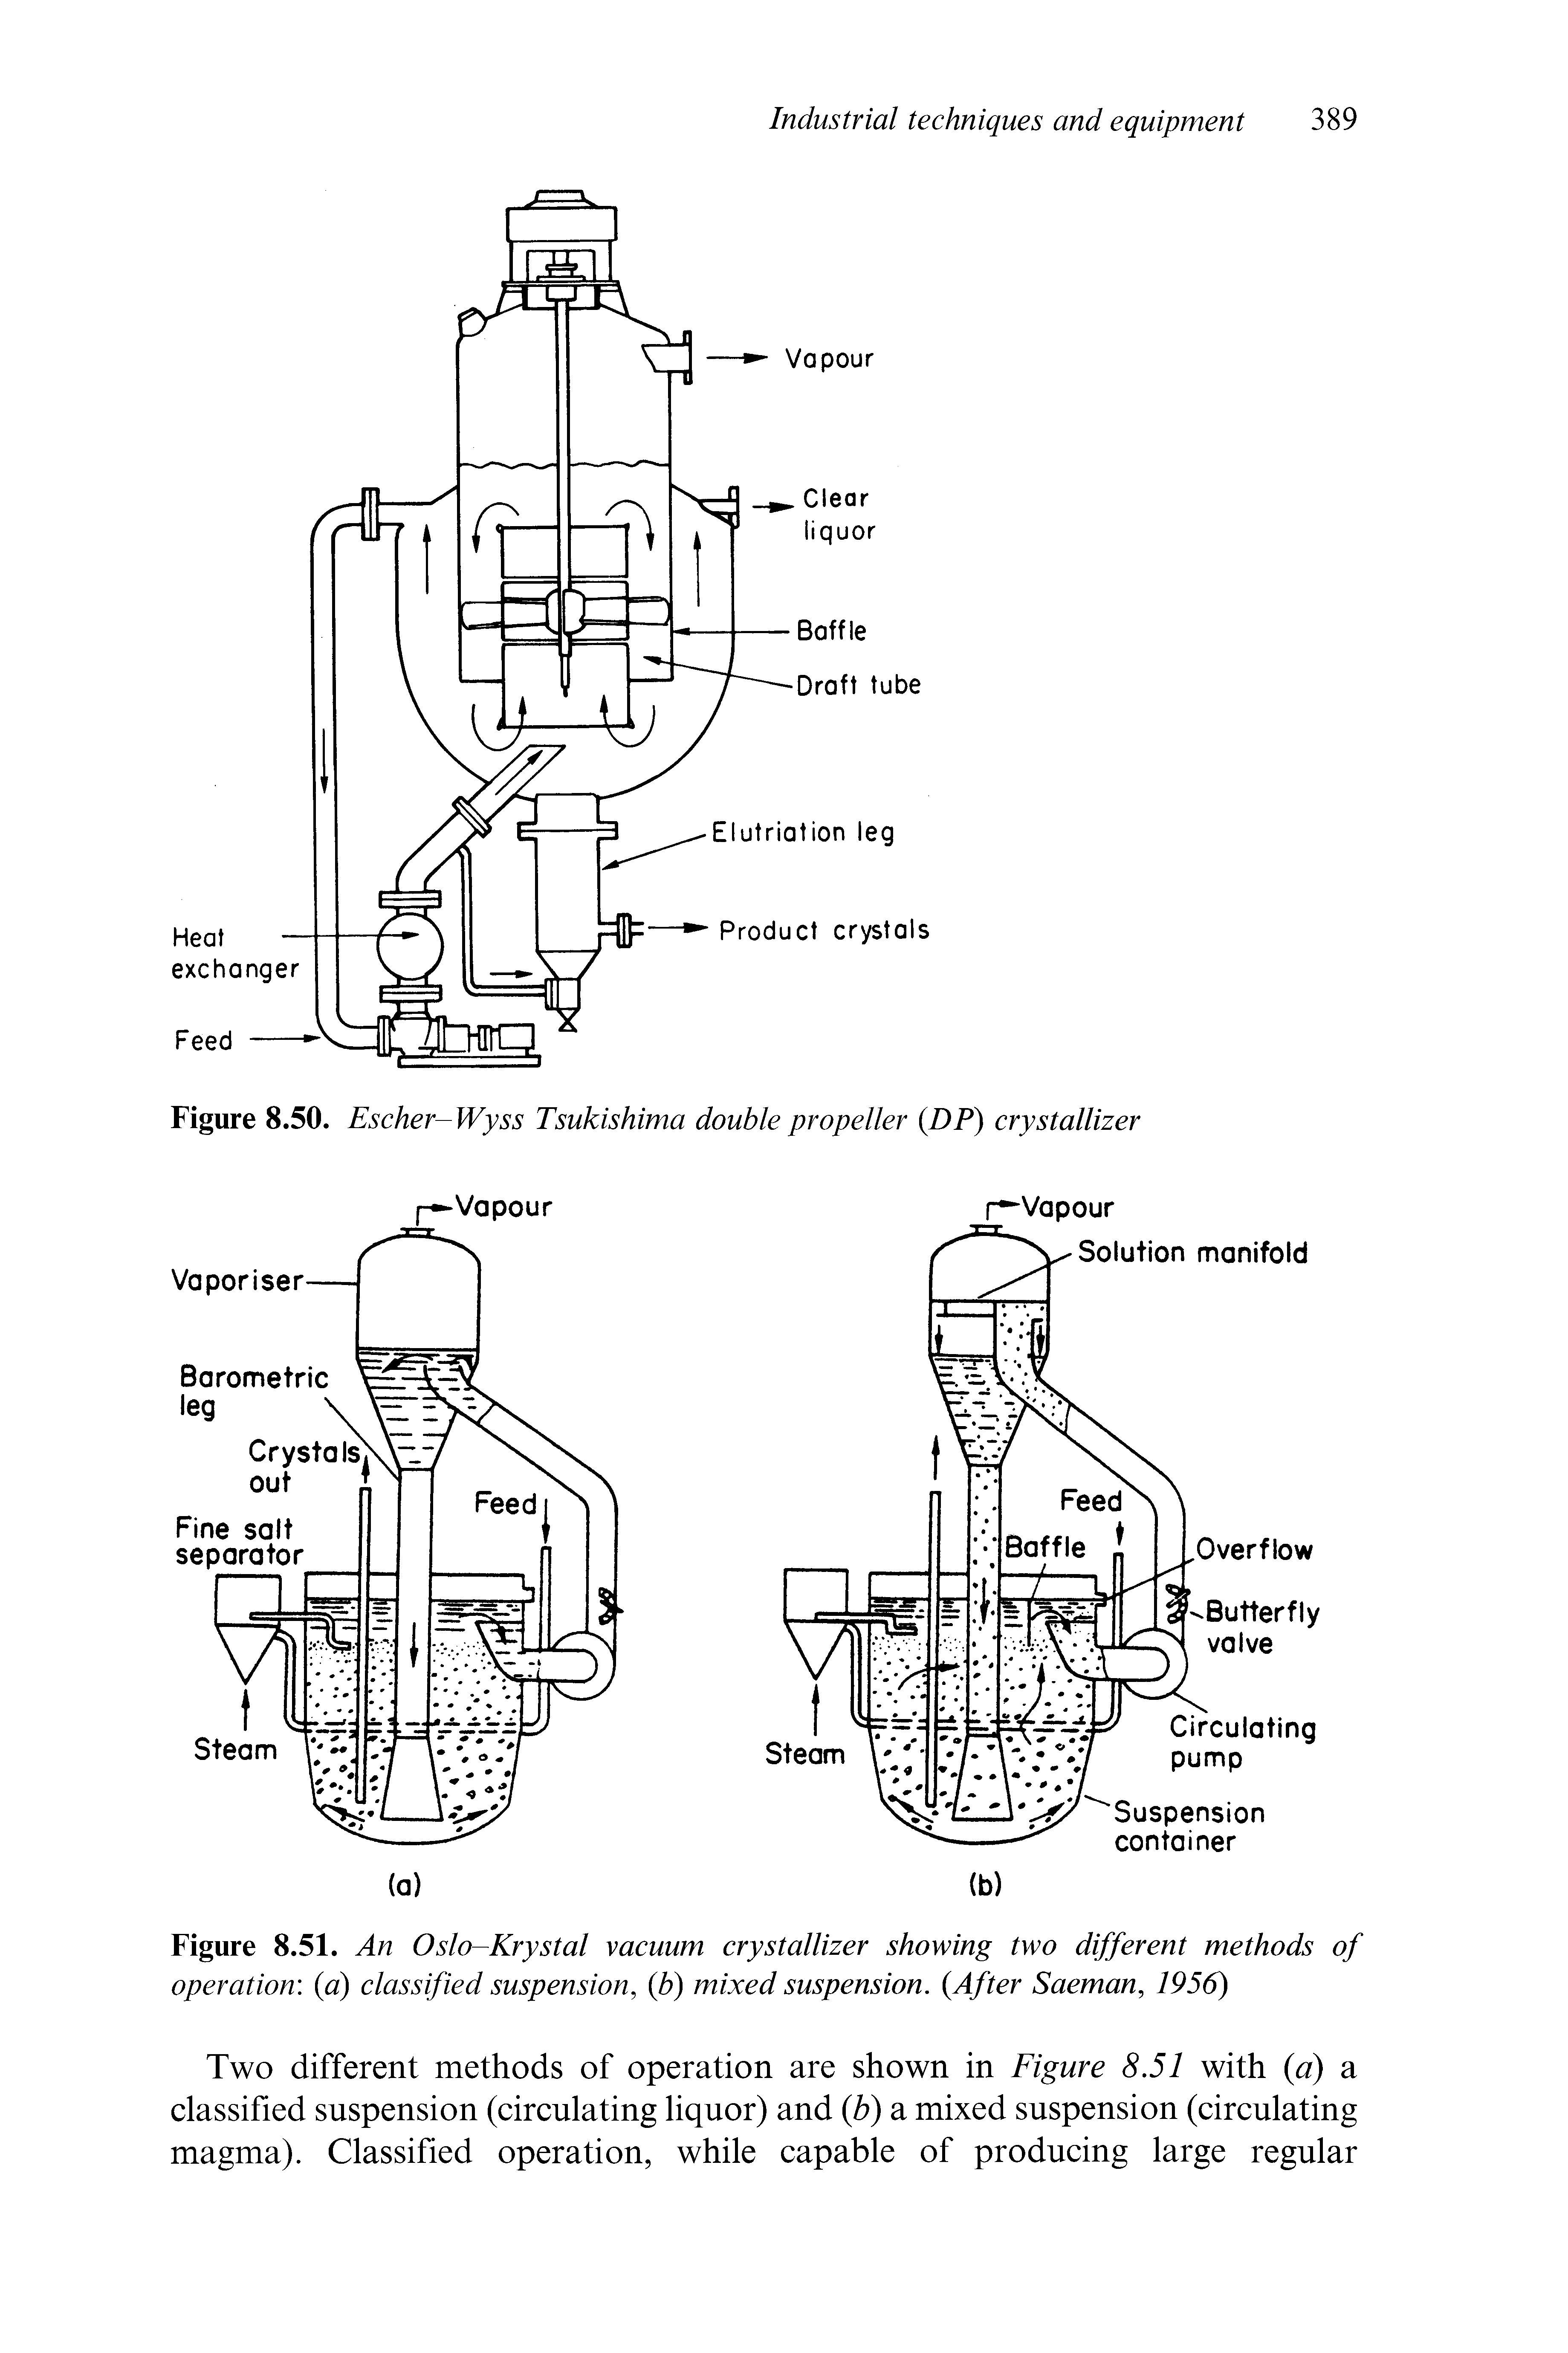 Figure 8.51. An Oslo-Krystal vacuum crystallizer showing two different methods of operation a) classified suspension, b) mixed suspension. After Saeman, 1956)...